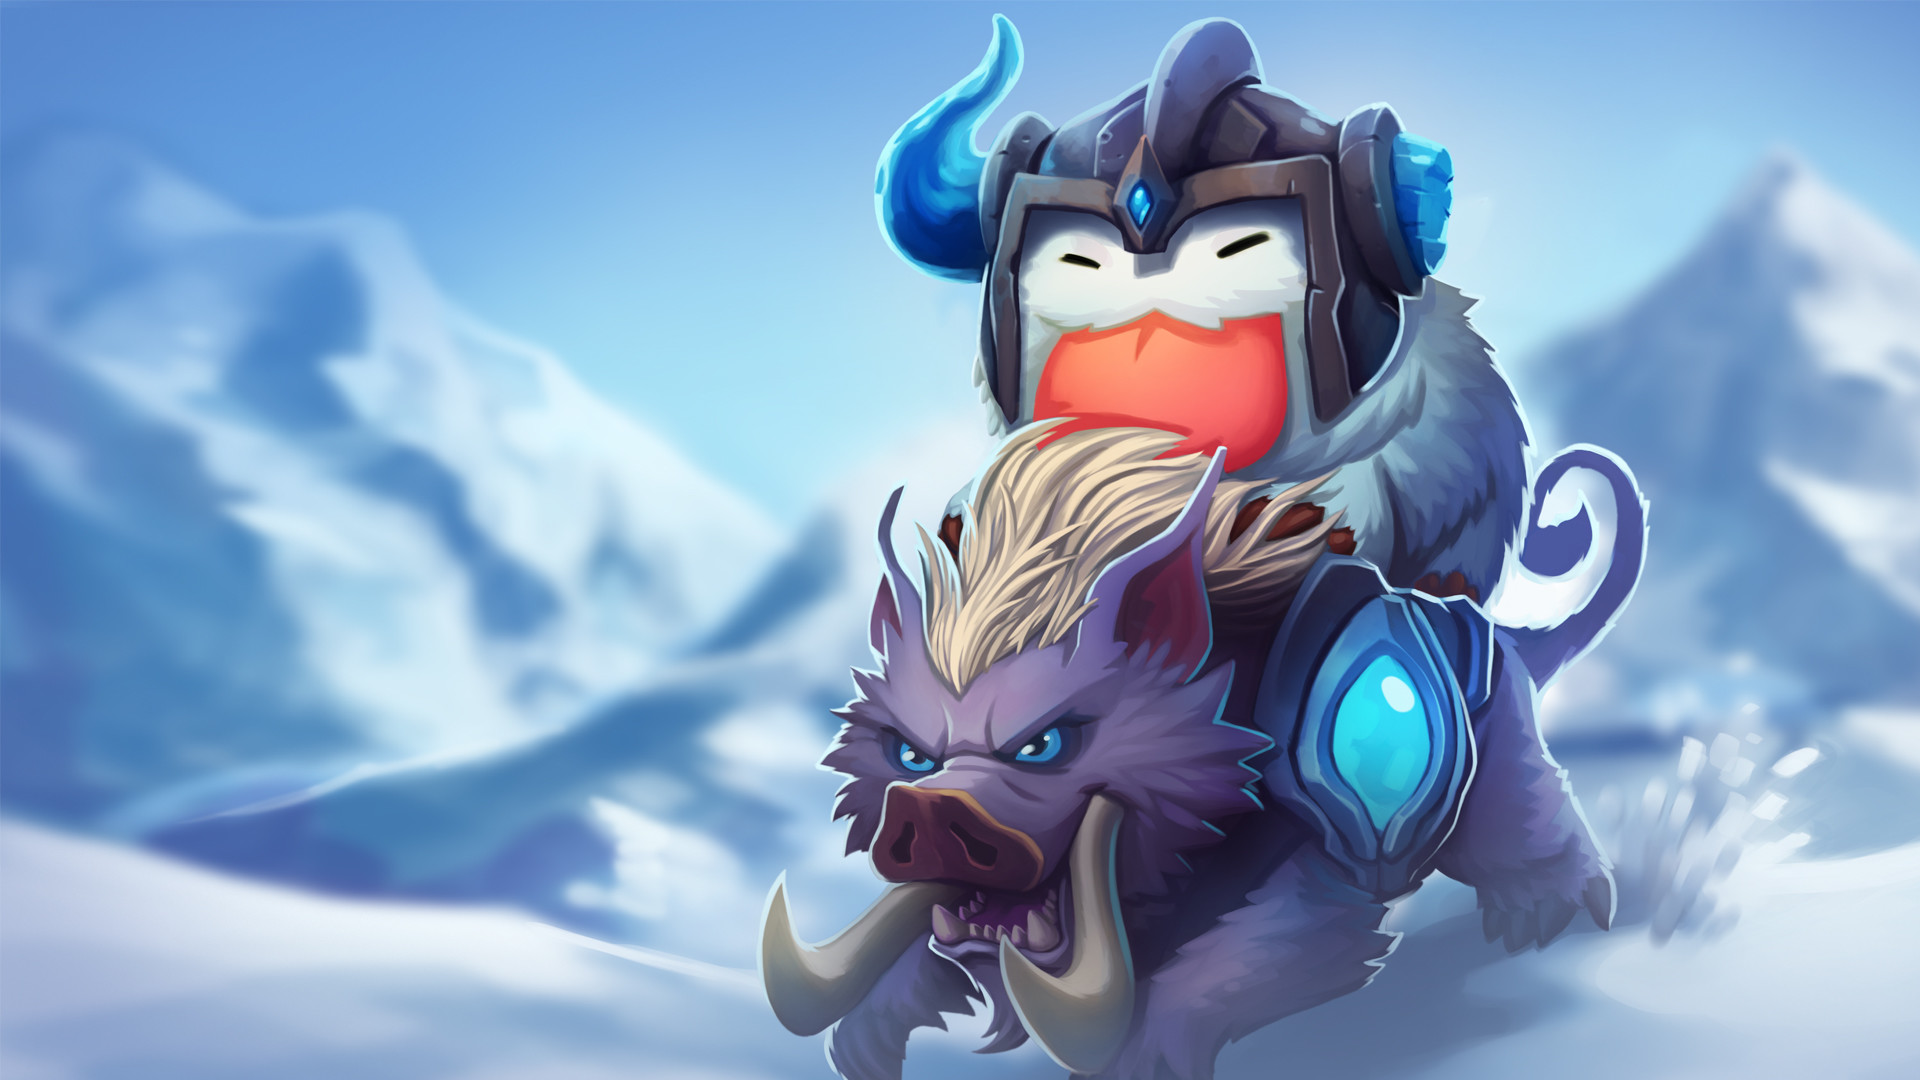 1920x1080 League of Legends images Poro Sejuani HD wallpaper and background photos